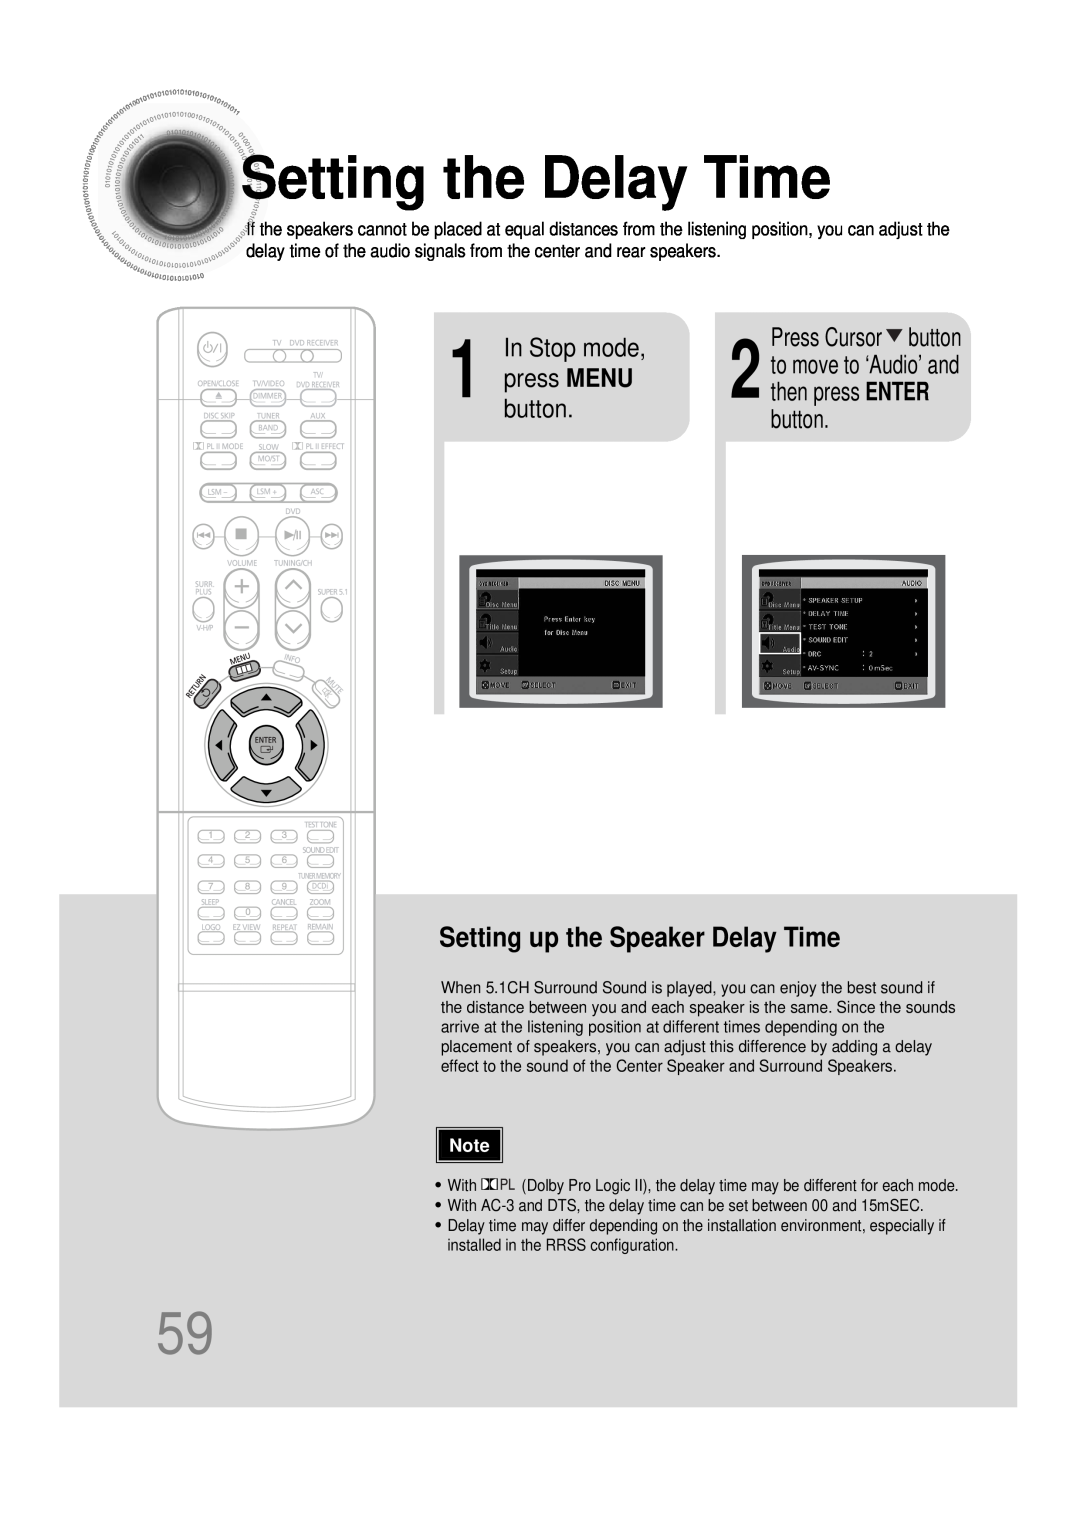 Samsung HT-DS665T Setting the Delay Time, Setting up the Speaker Delay Time, Press Cursor button, In Stop mode 